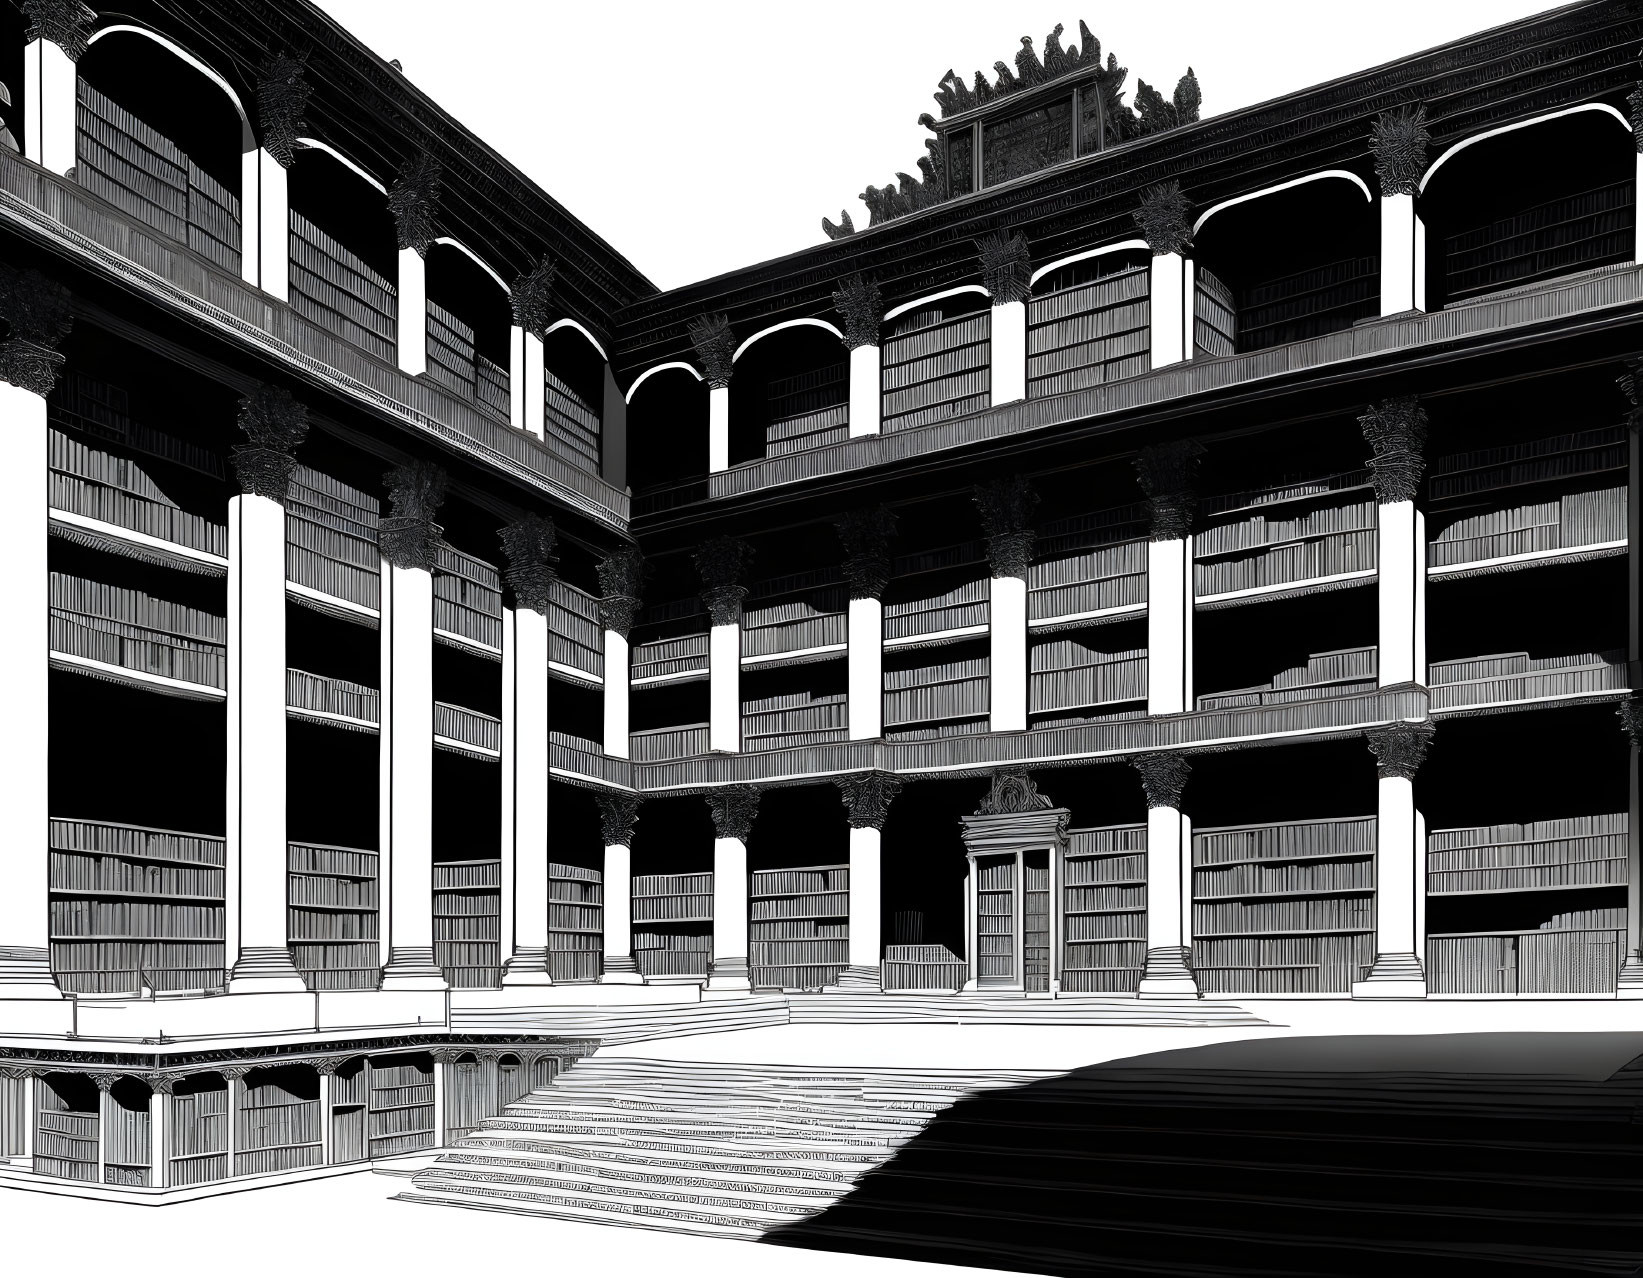 Detailed monochrome architectural drawing of classical building with colonnades, arches, and book-lined balcon